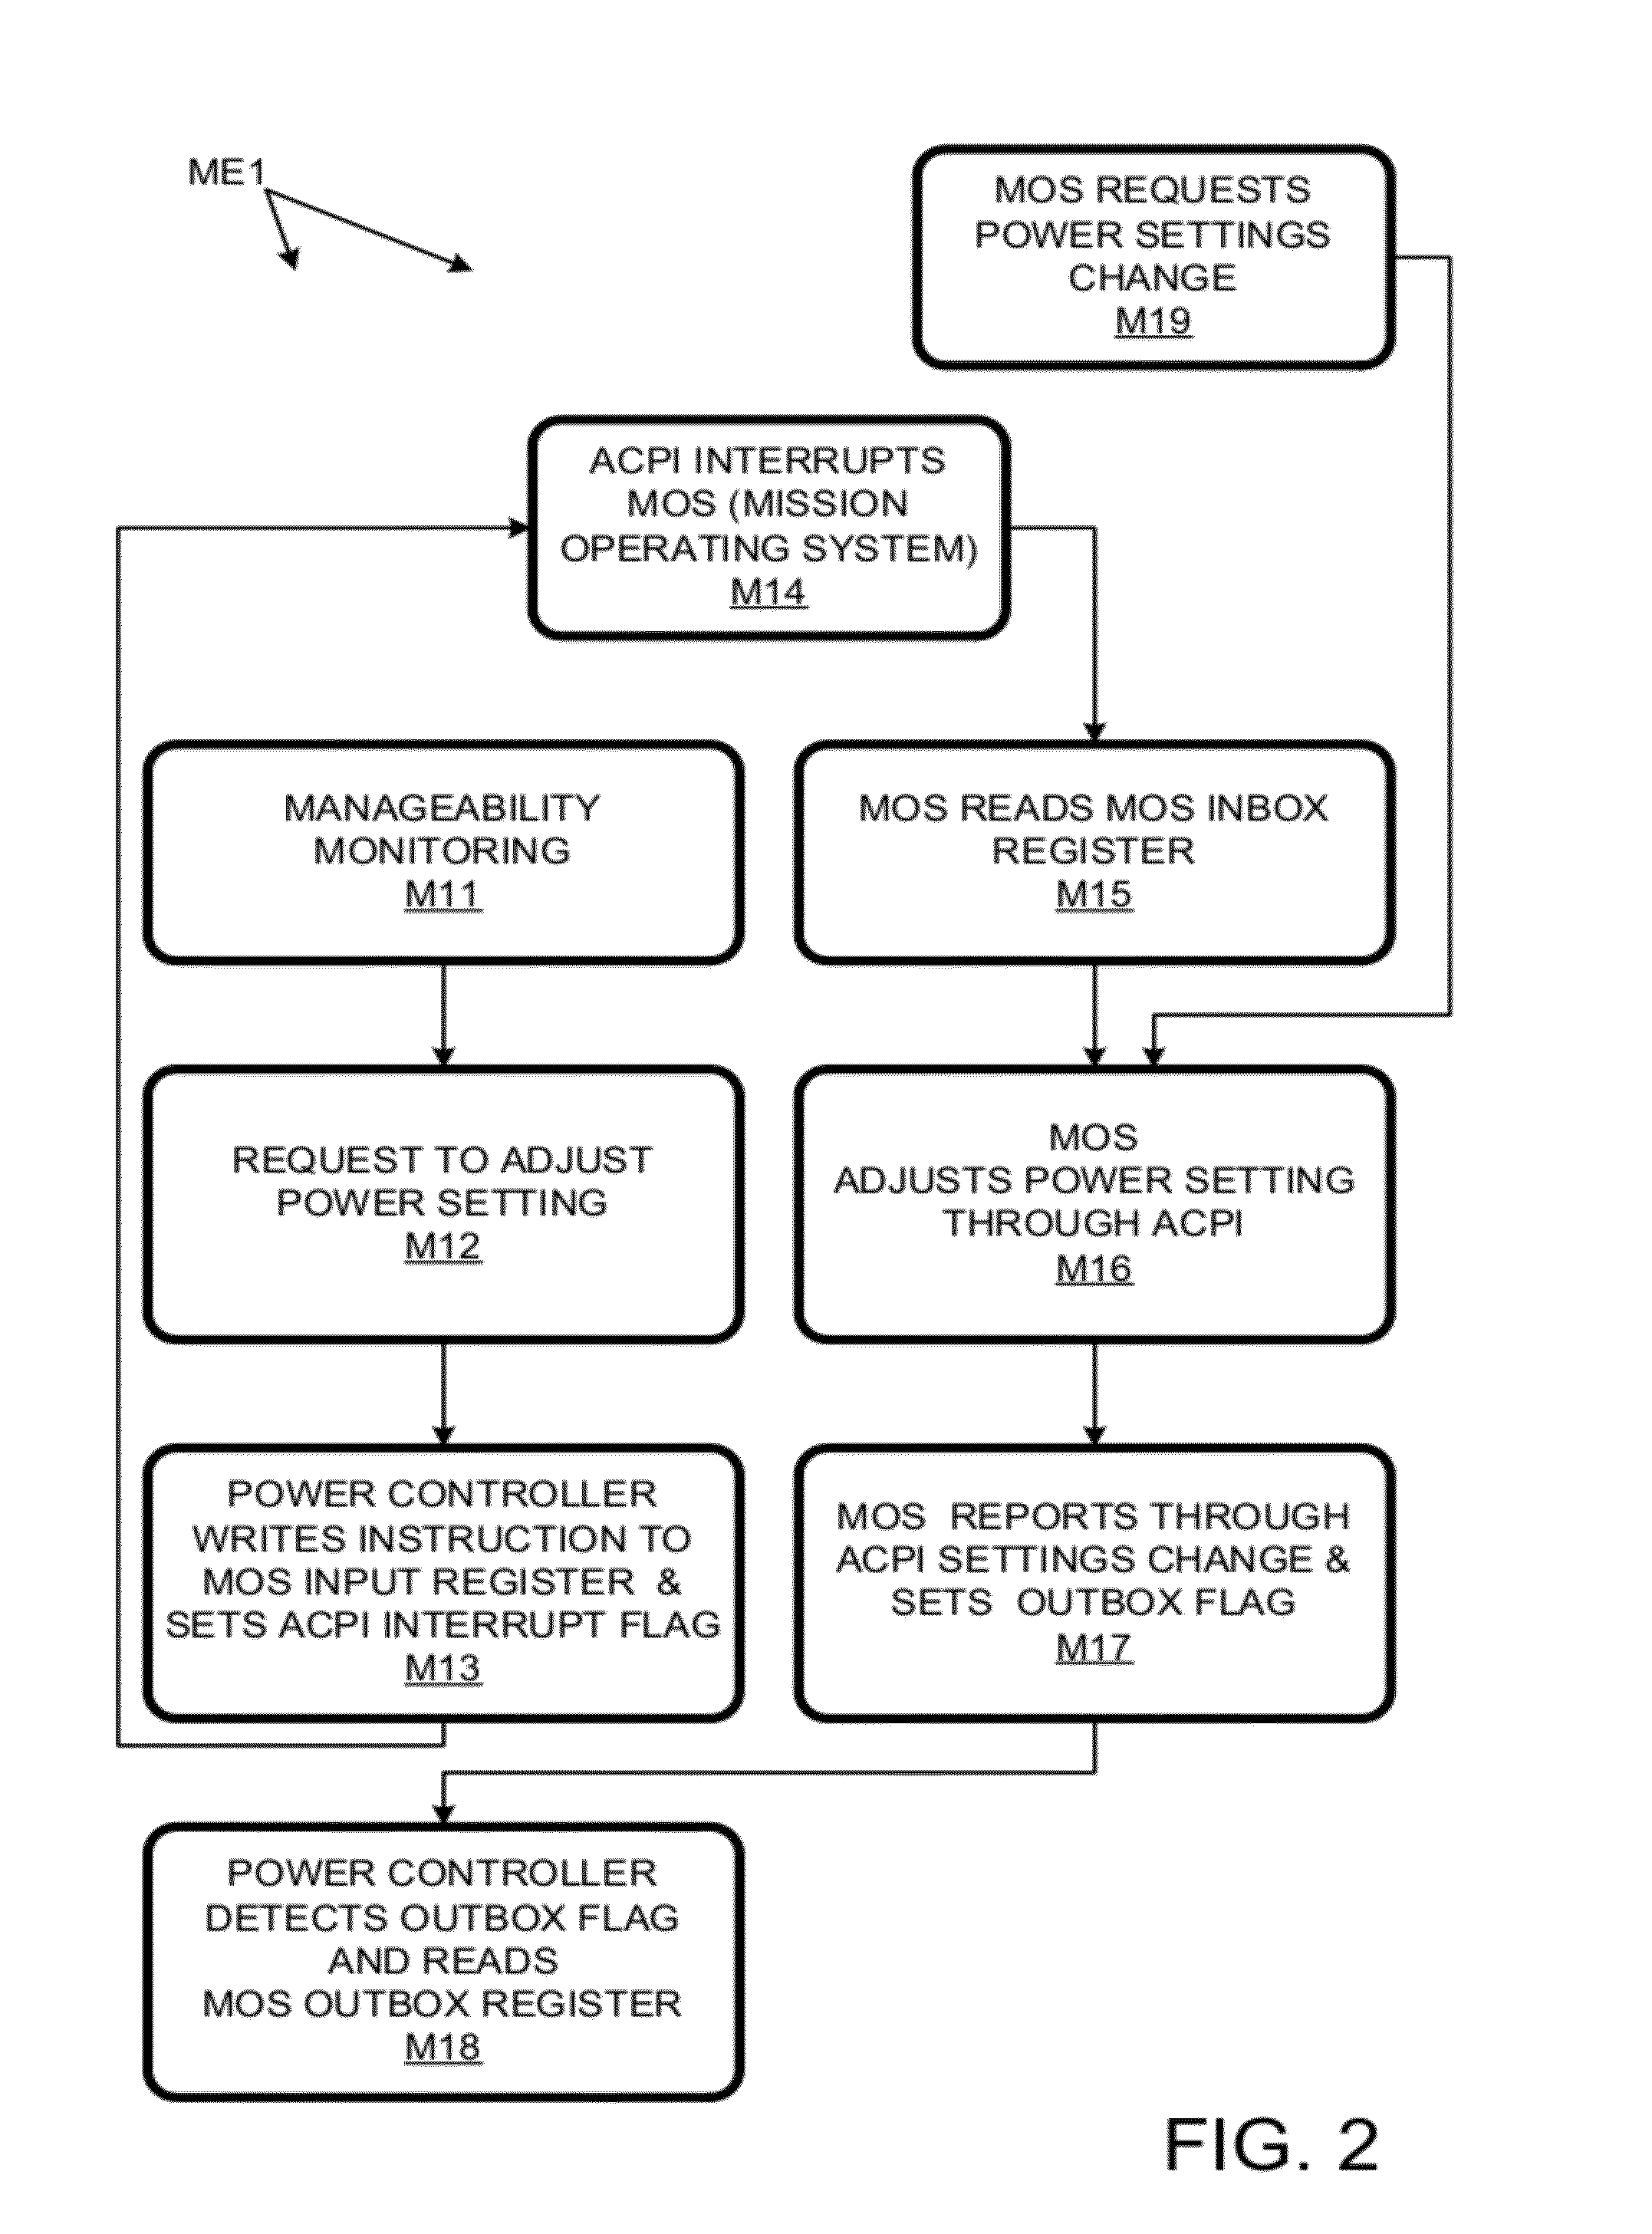 Power setting adjustments by mission operating system in response to requests from platform manager